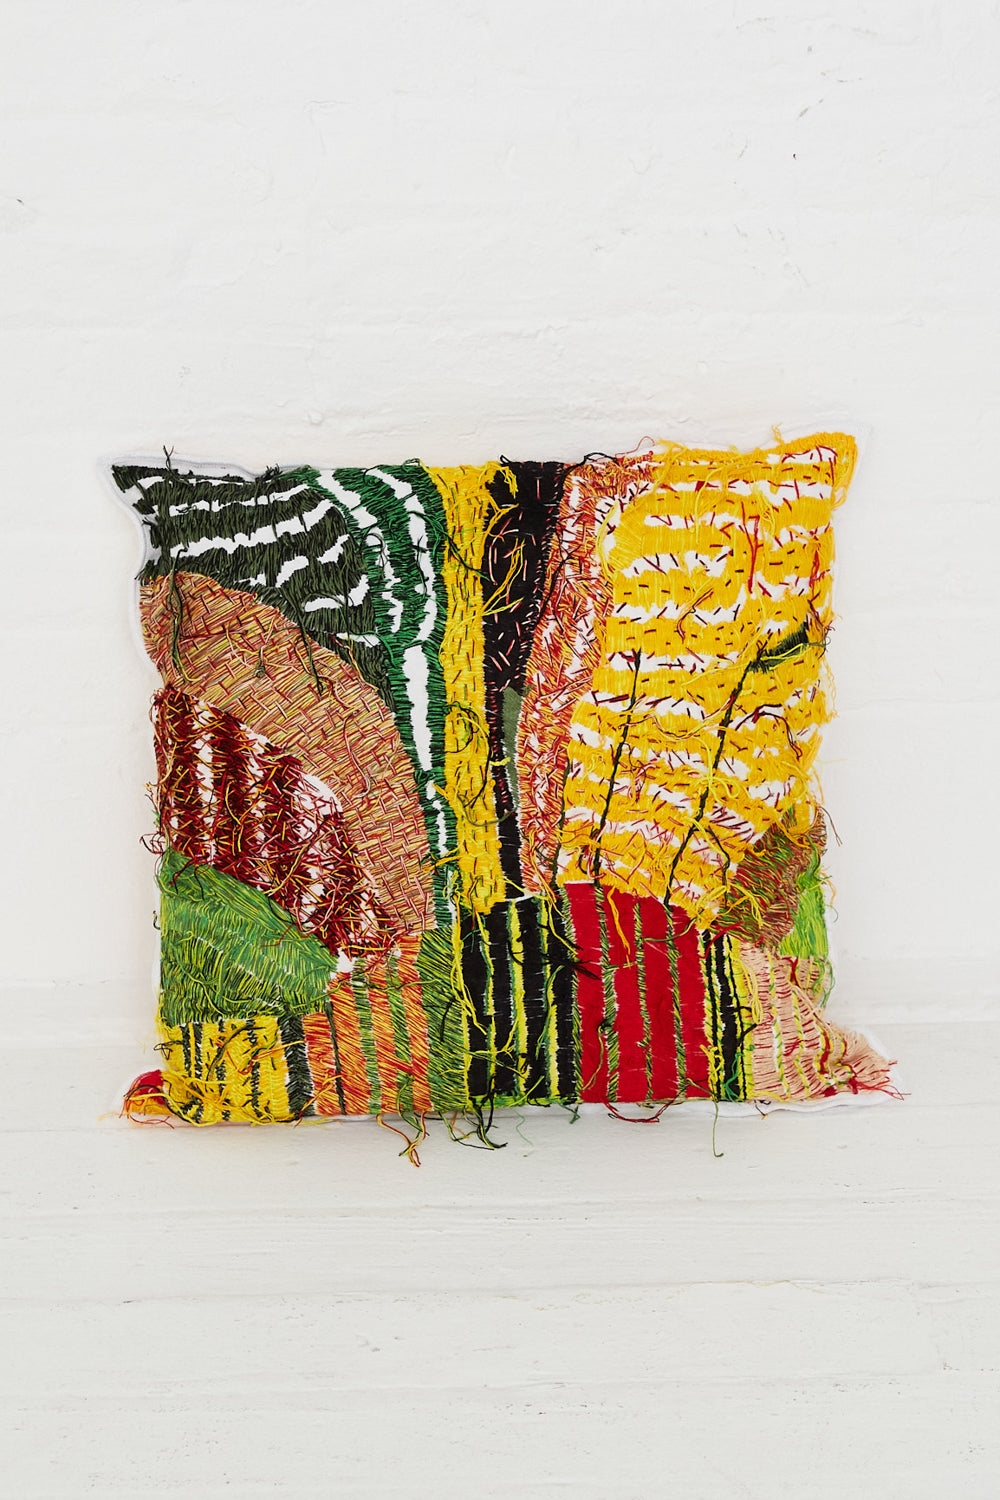 A Hand Embroidered Harvest Topographic Cushion by Luna Del Pinal with a colorful hand embroidery design on it.